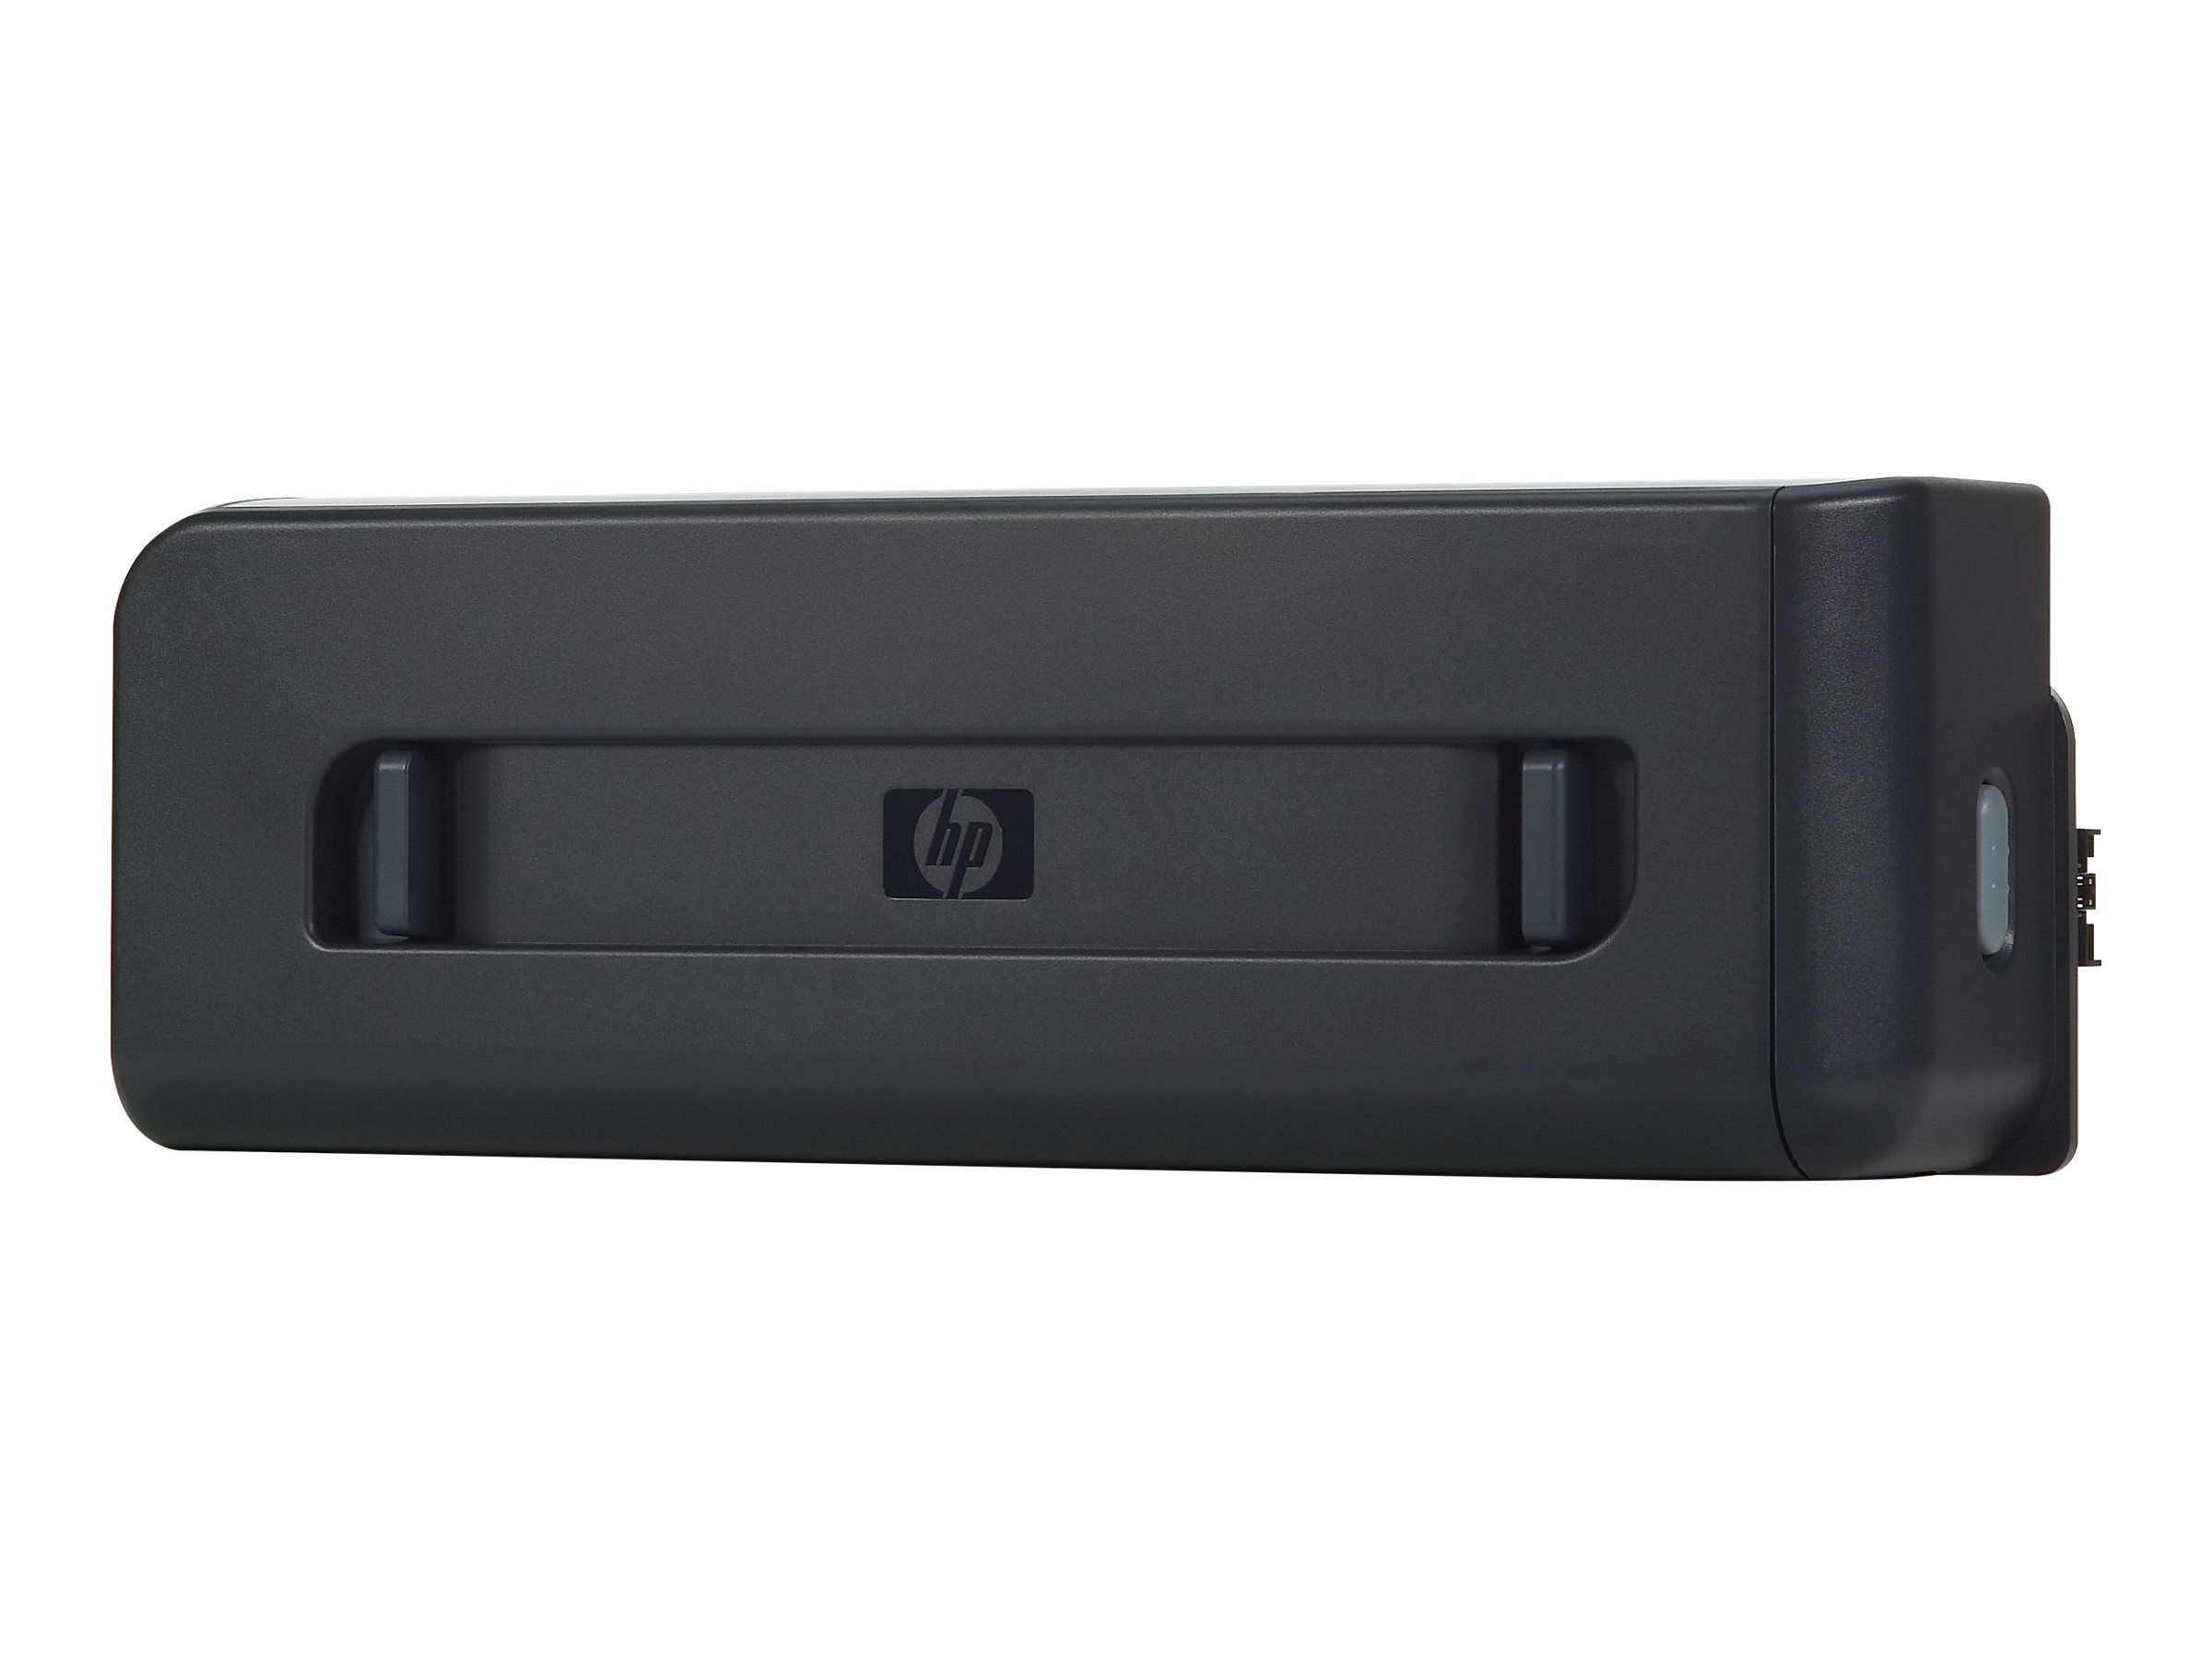 HP Automatic Two-Sided Printing Accessory - Duplexeinheit - für Officejet 7110, 7110 Wide Format ePrinter, 7110xi, 7610 Wide Format, 7612 Wide Format